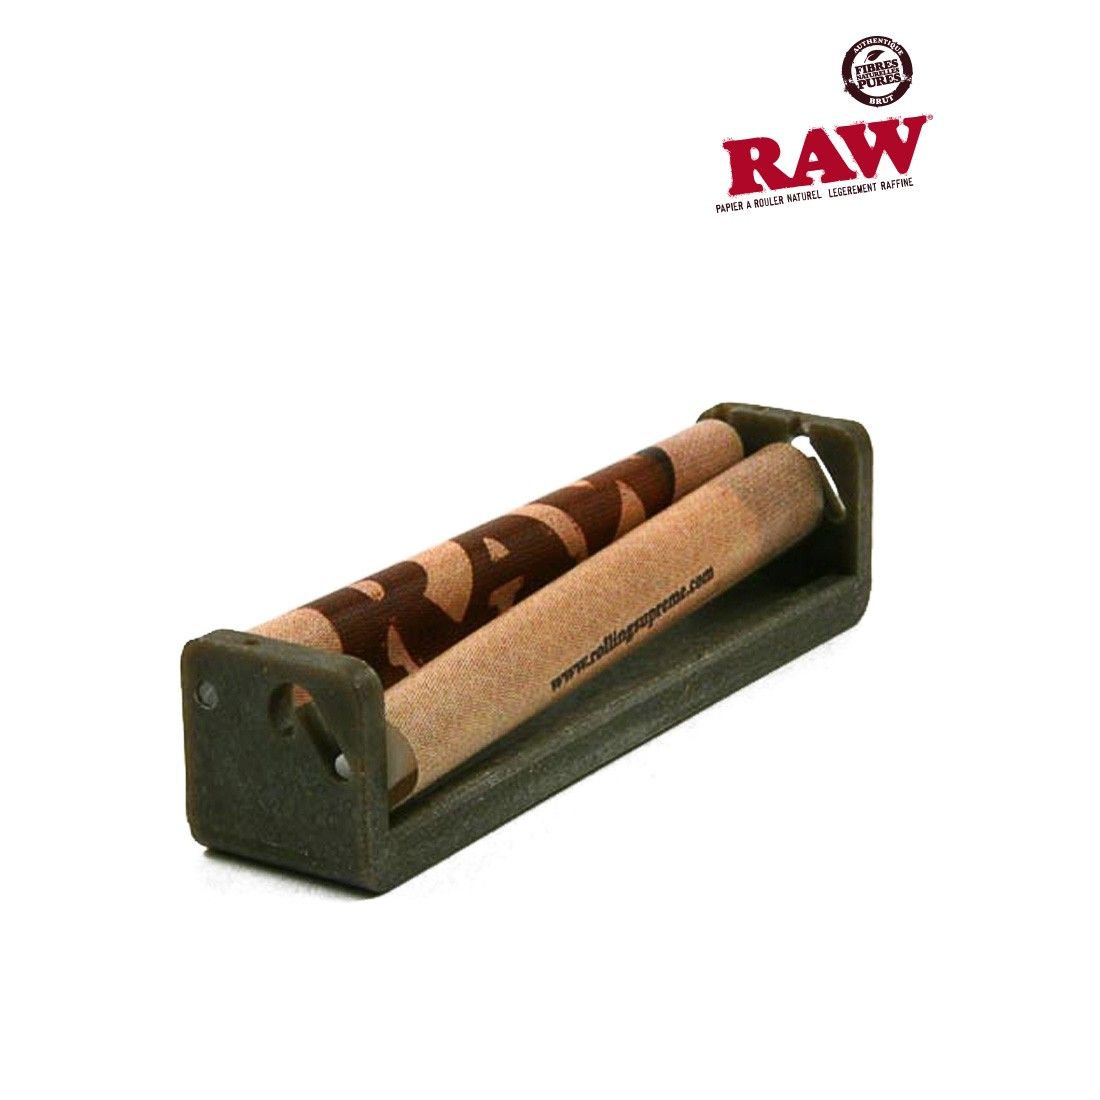 raw rouleuse a tabac king size slim 100% chanvre, Rouleuse